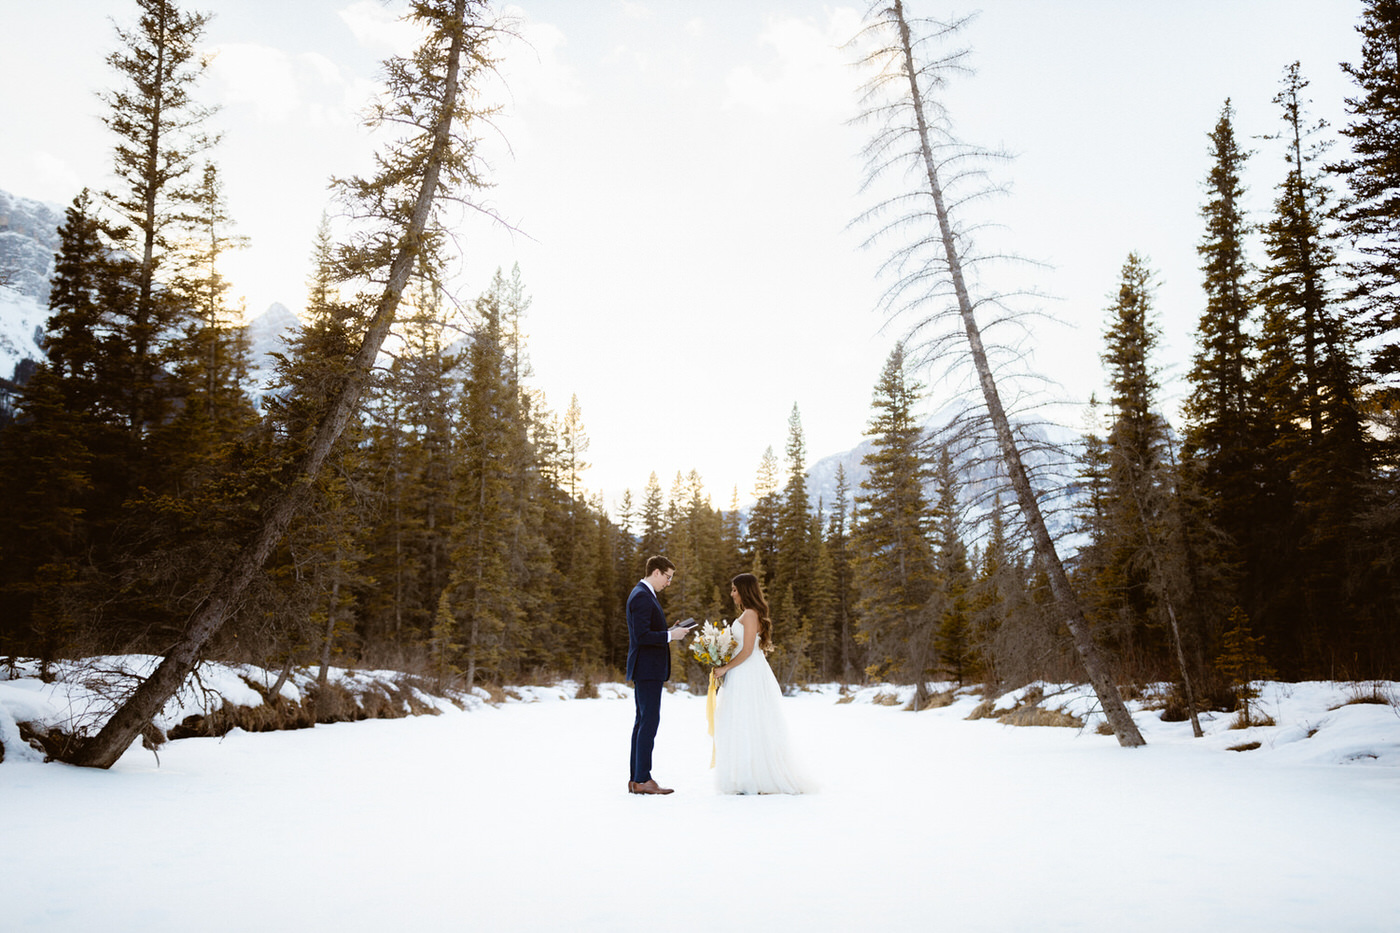 Canmore wedding videographer - Image 17